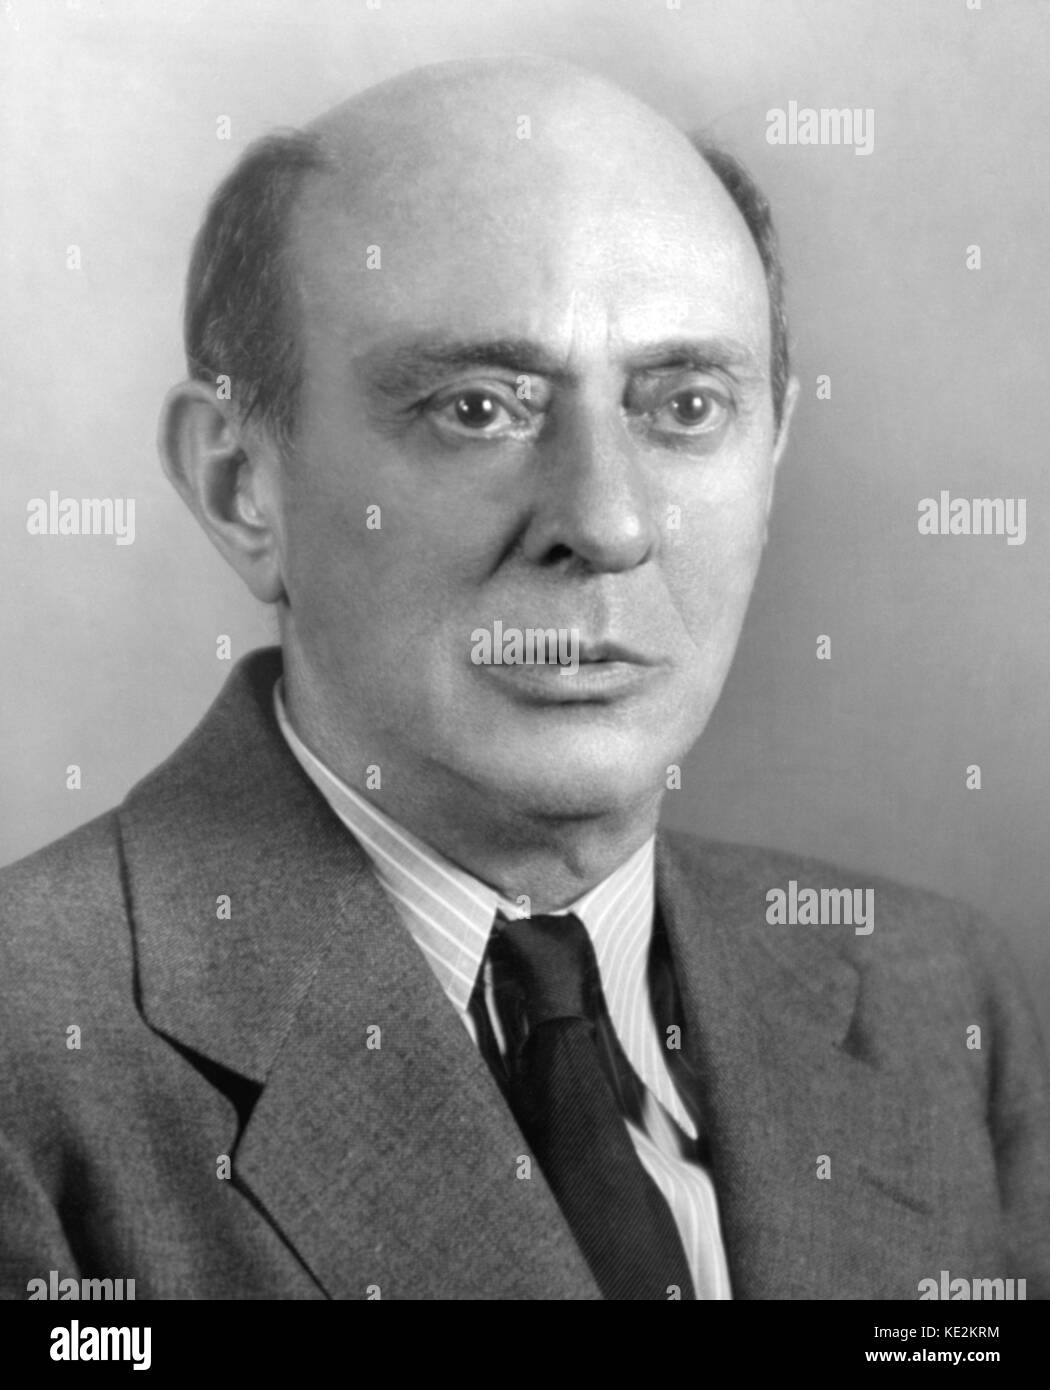 Arnold Schoenberg in the 1930's portrait. Austrian composer 13 April 1874 - 13 July 1951. Stock Photo